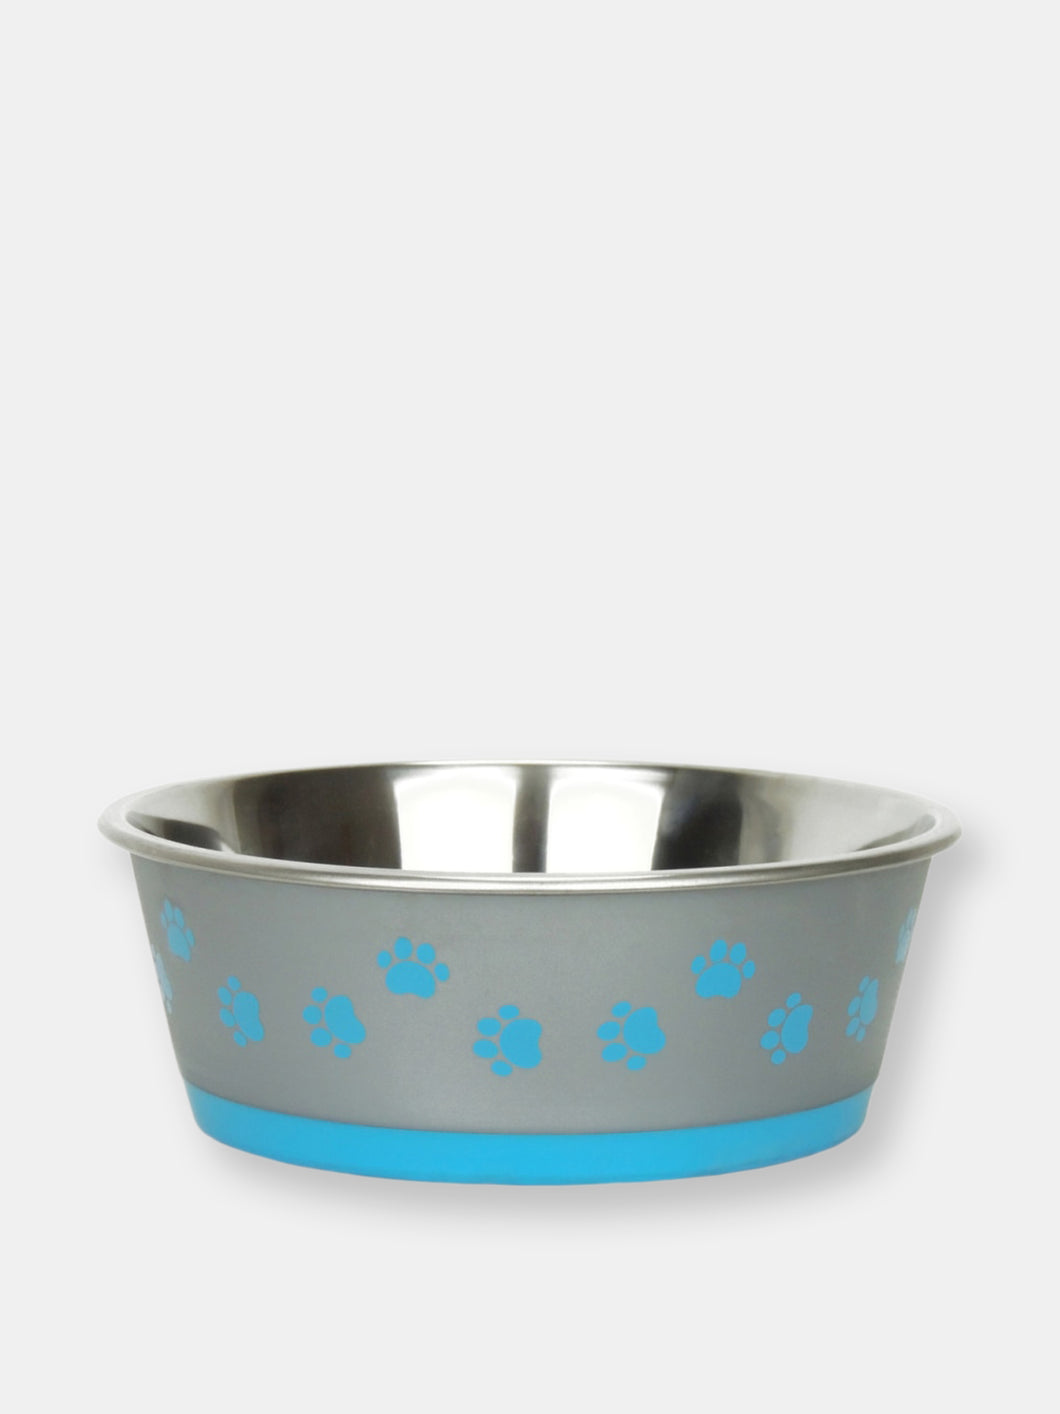 Classic Hybrid Stainless Steel Dog Bowl